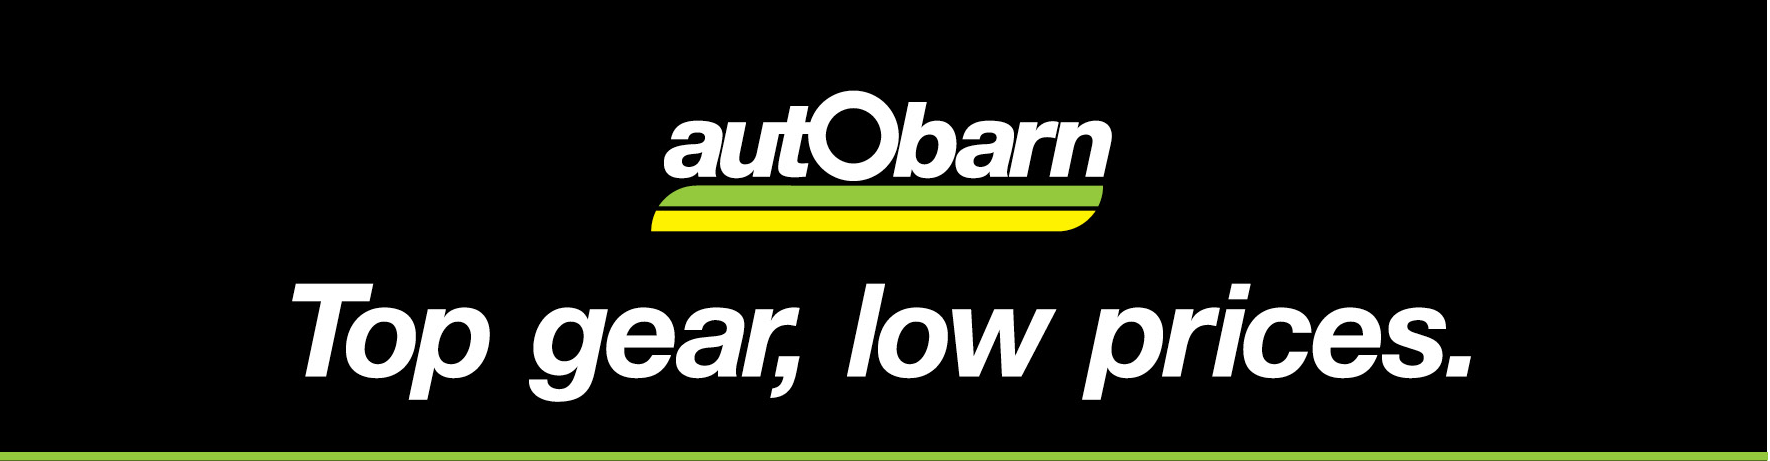 All Autobarn Deals & Promotions